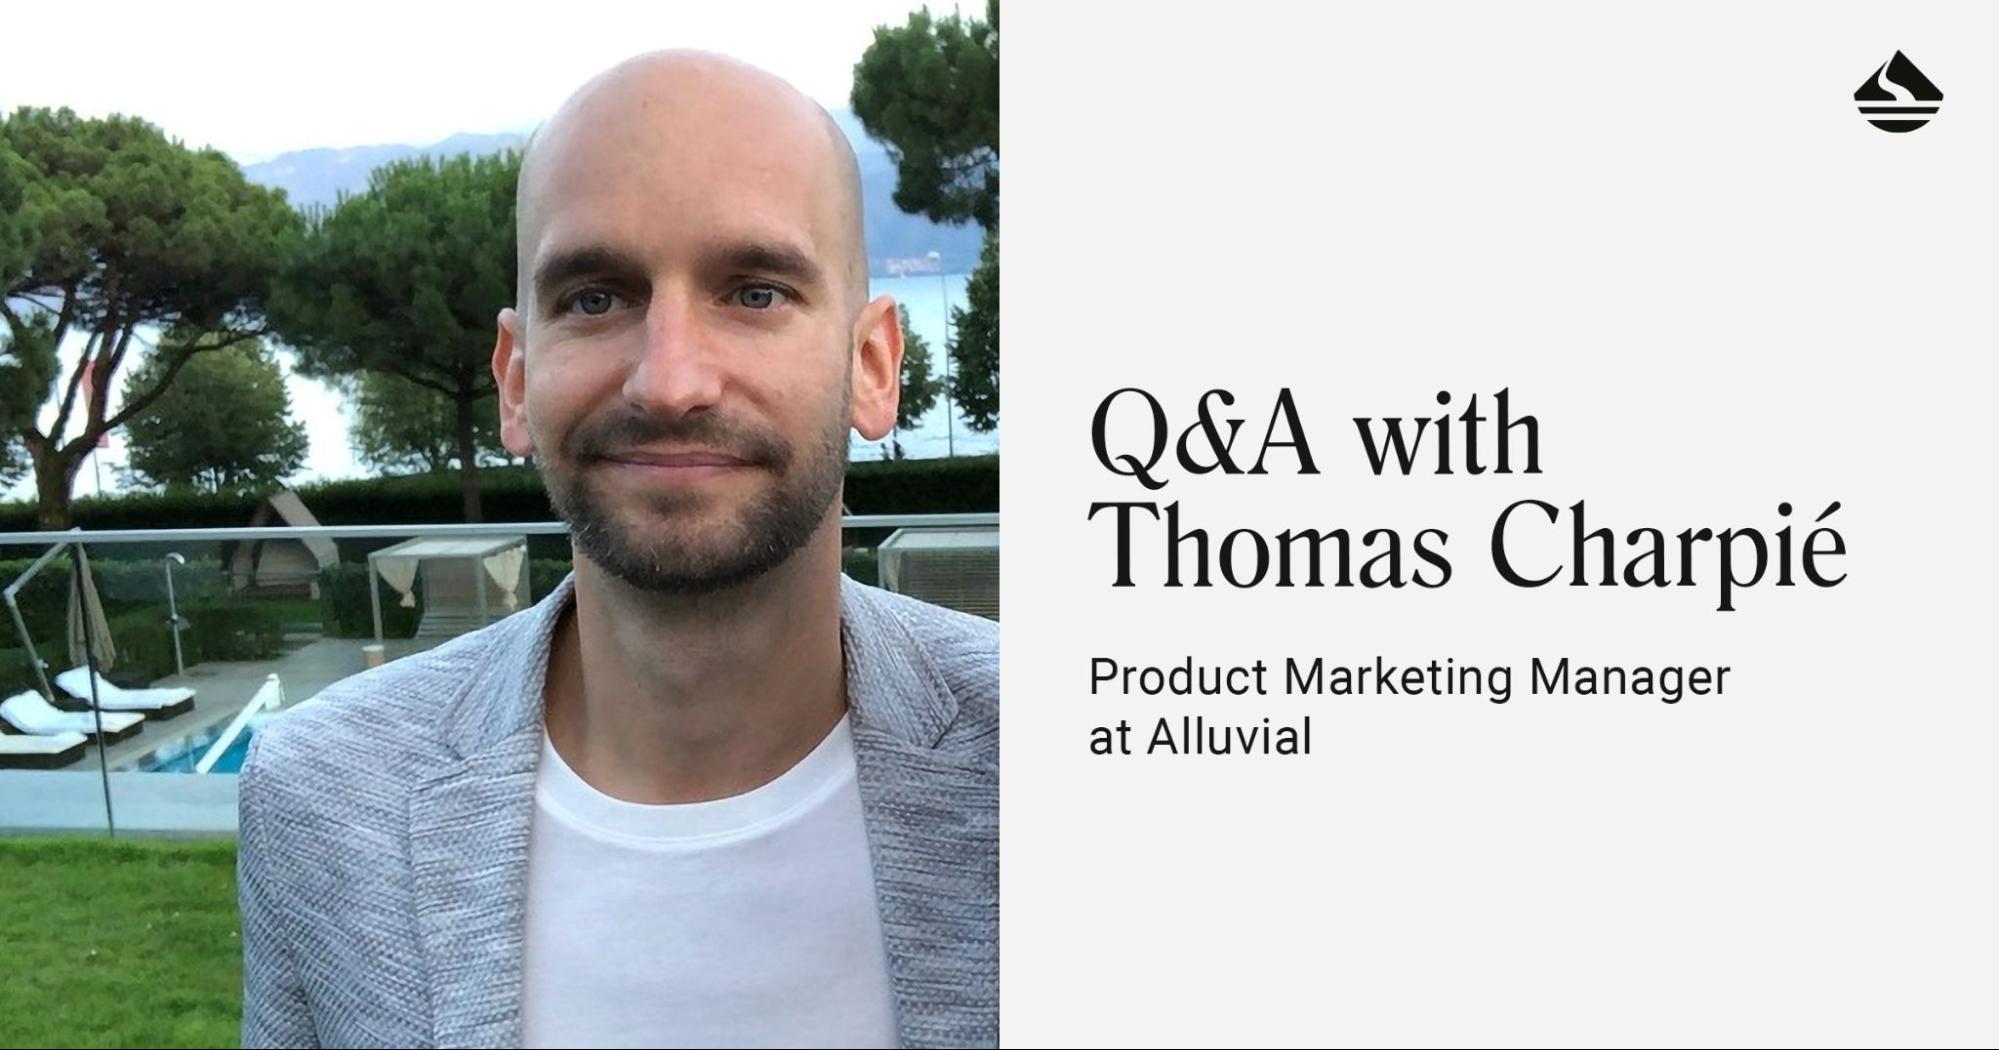 Q&A with Thomas Charpié, Product Marketing Manager at Alluvial